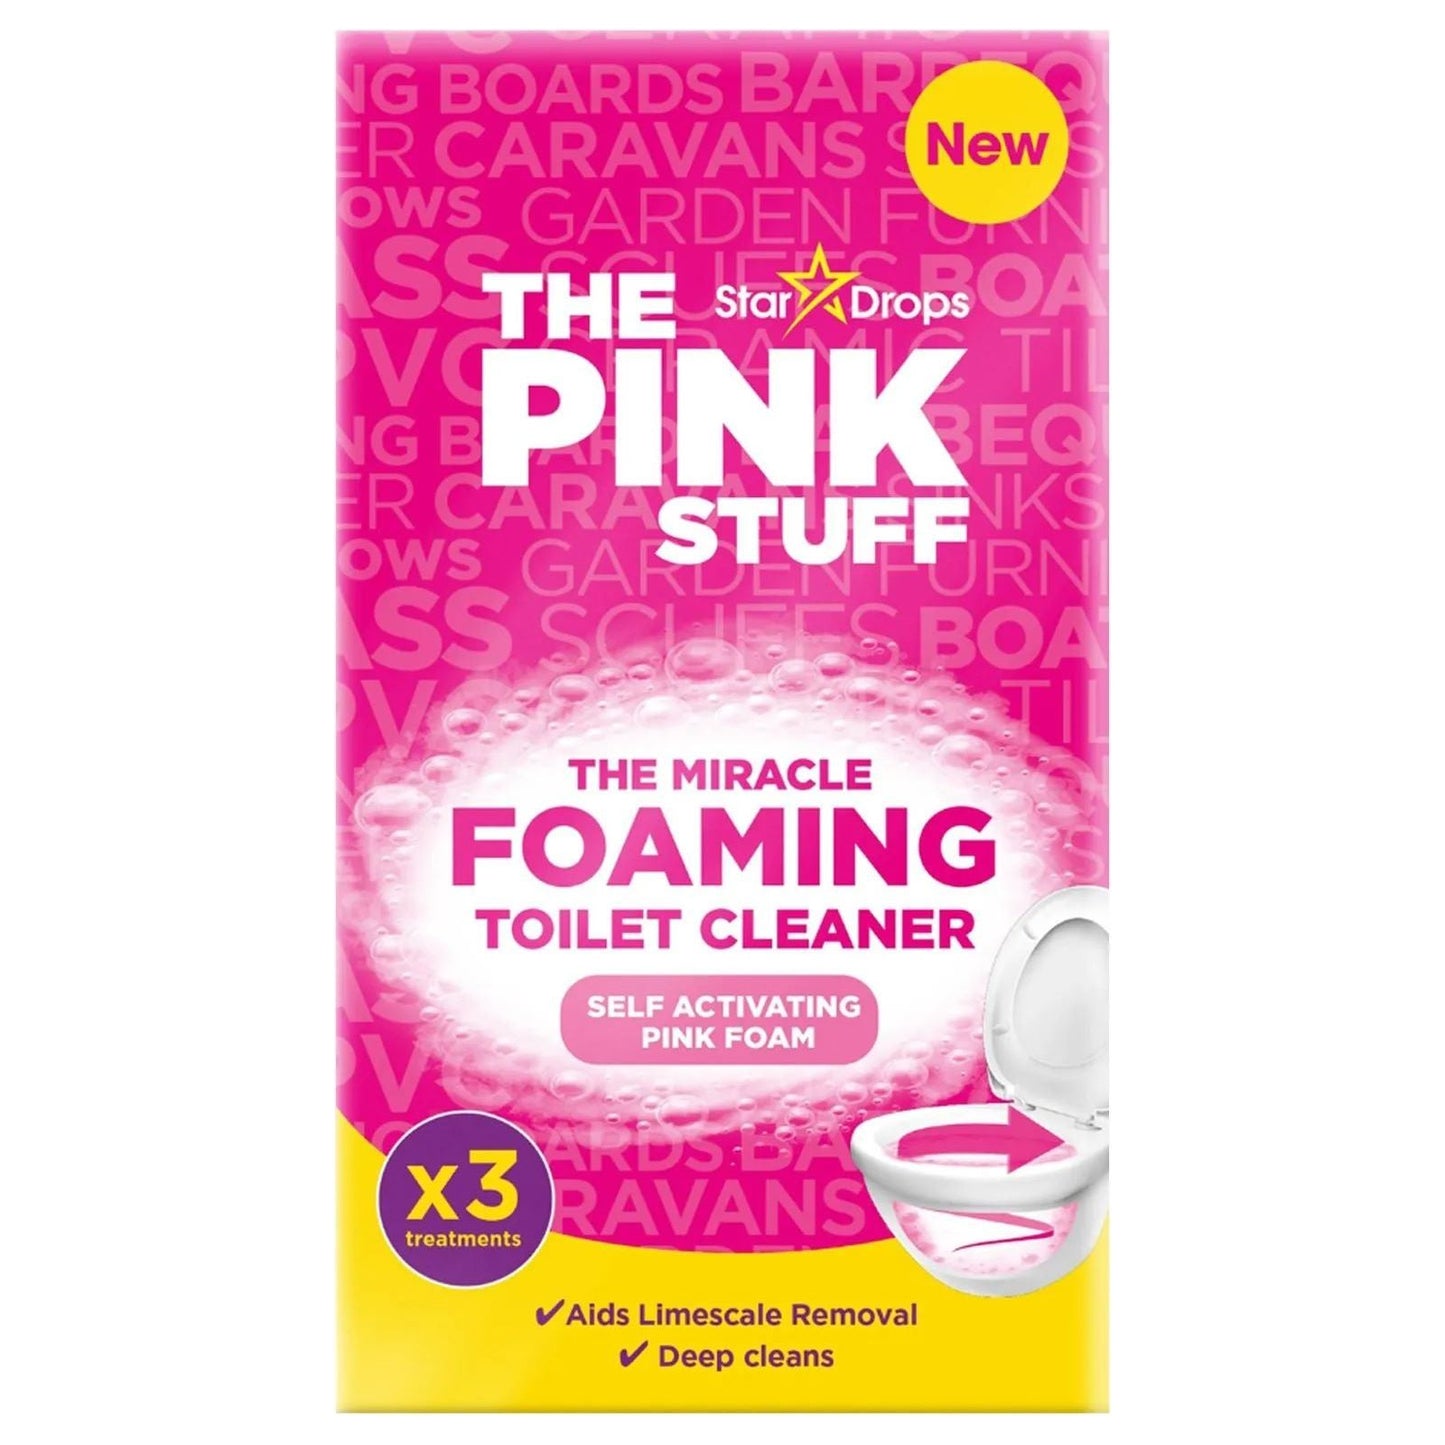 The Pink Stuff Miracle Laundry Detergent for Sensitive Skin, Liquid & Rhubarb Scent - 1 Each